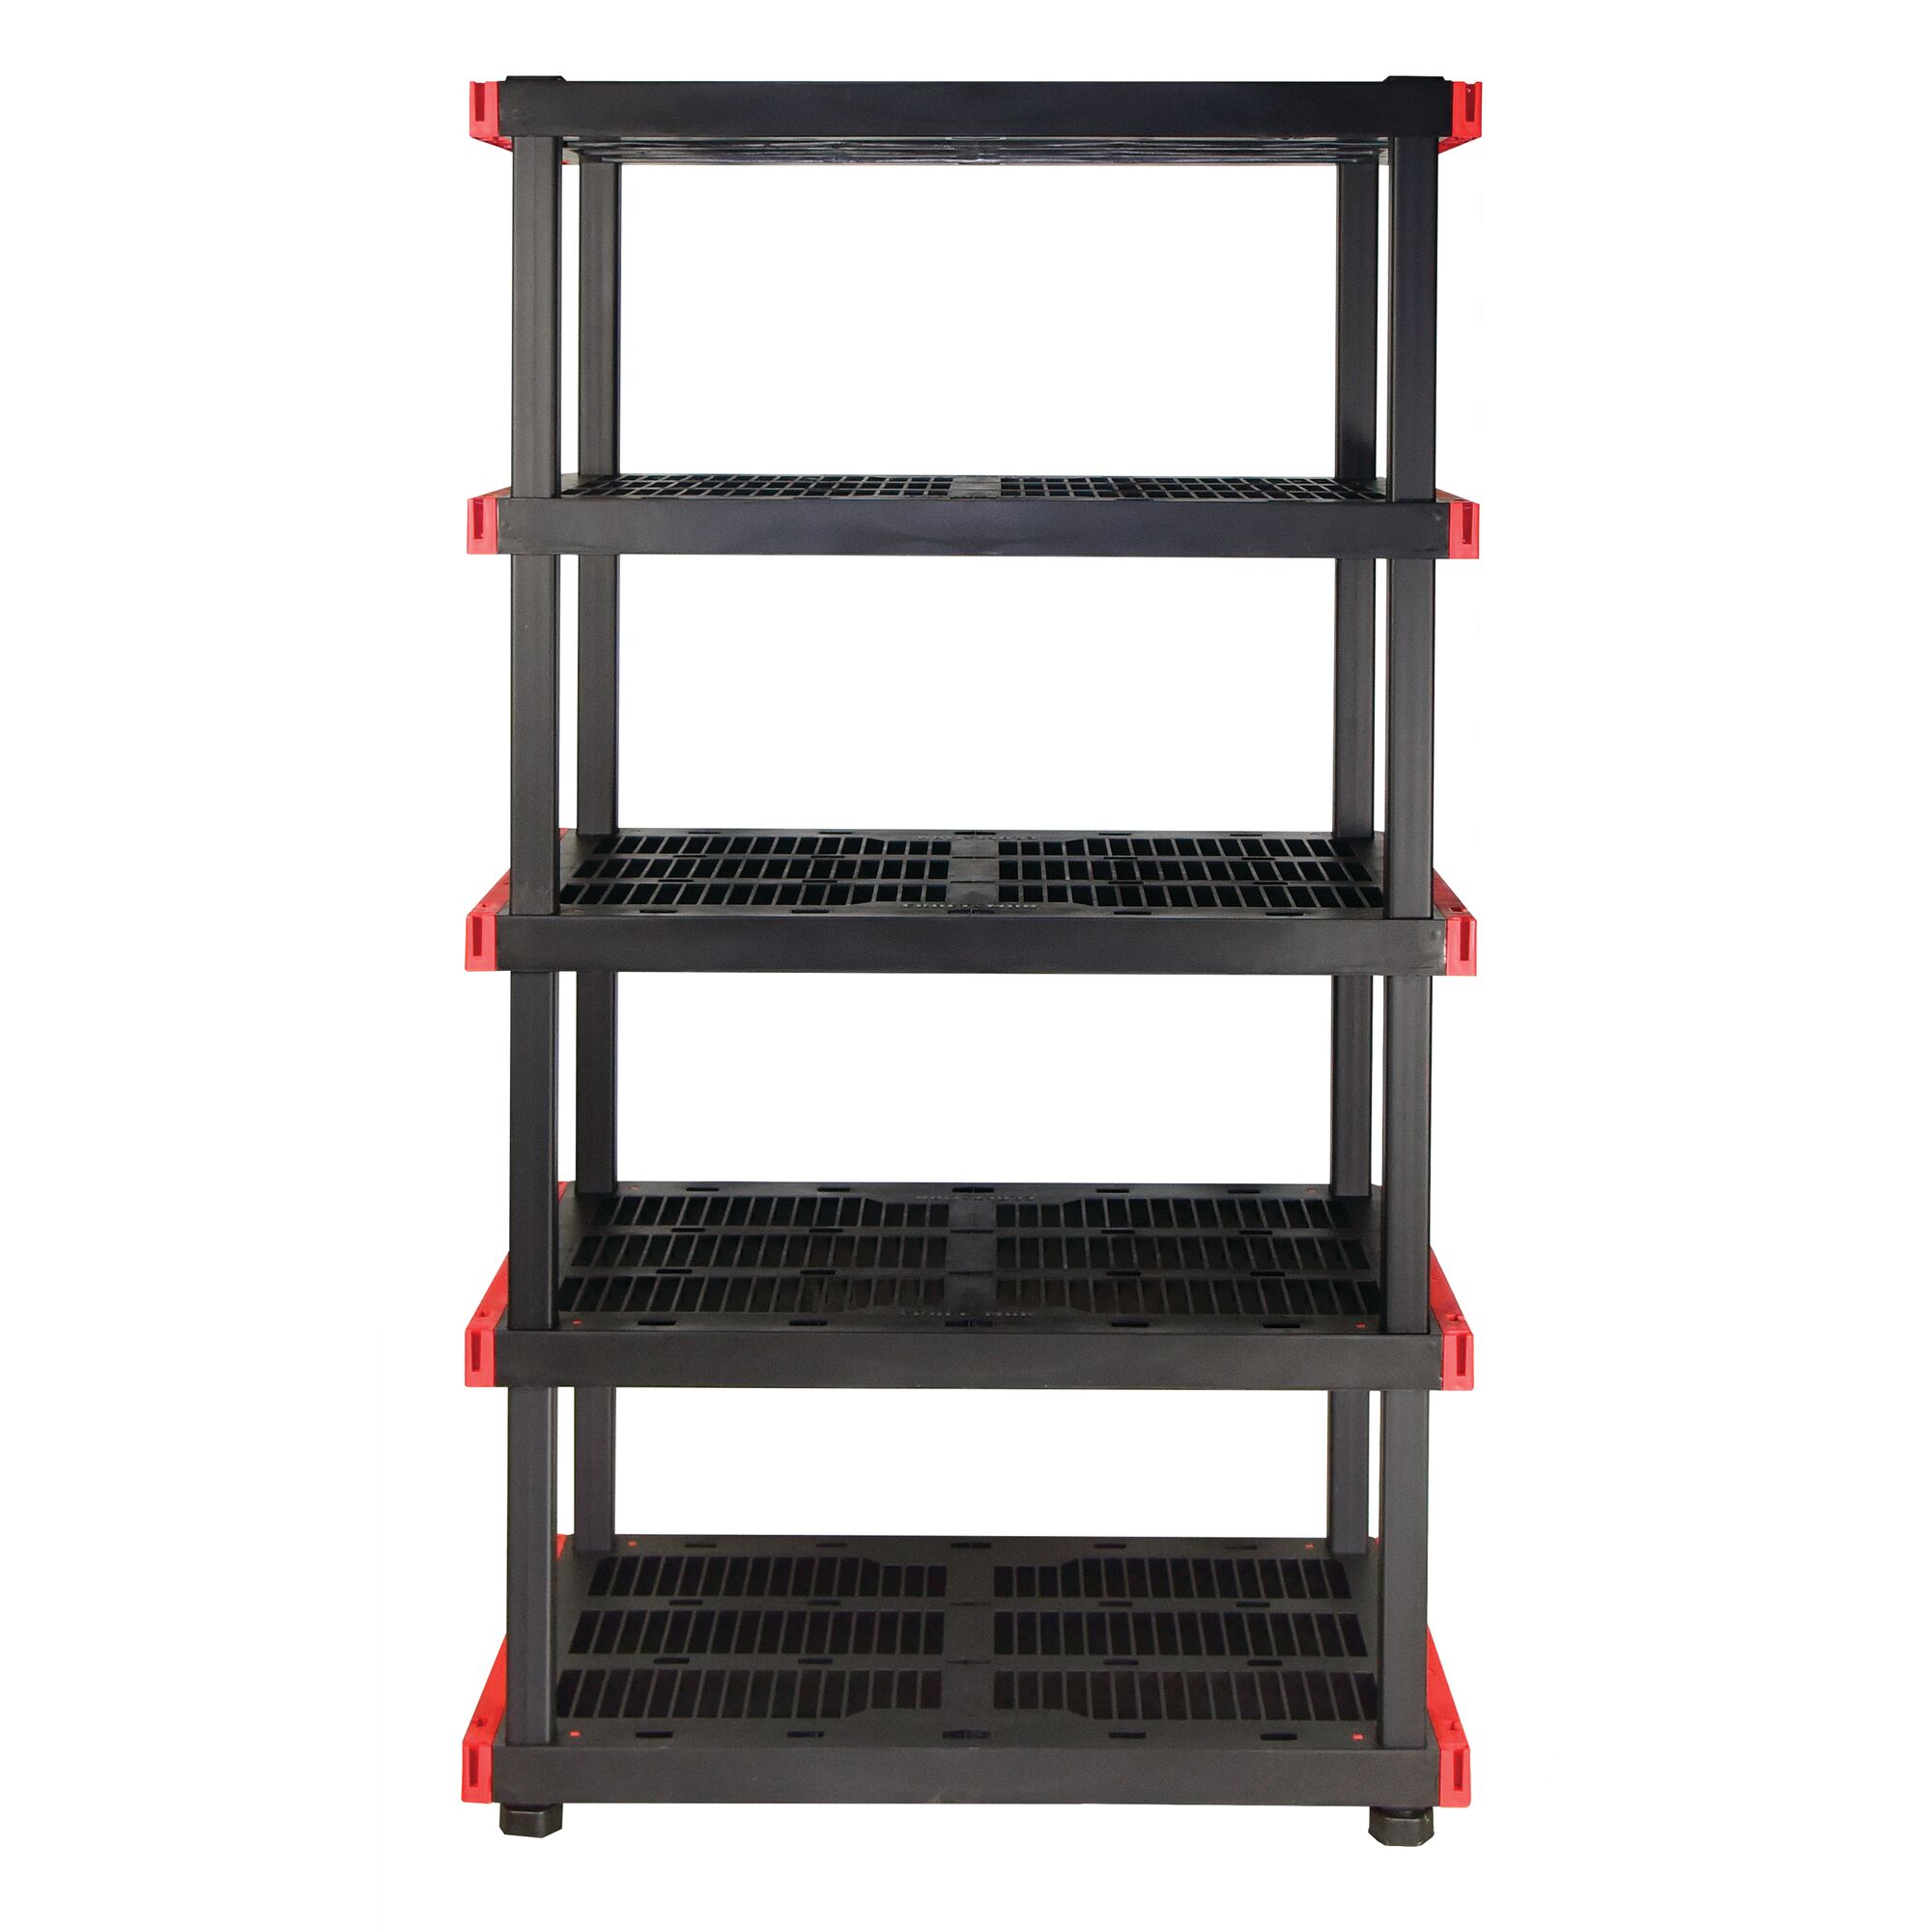 Left profile of 24 by 40 ventilated 5 tier shelf.